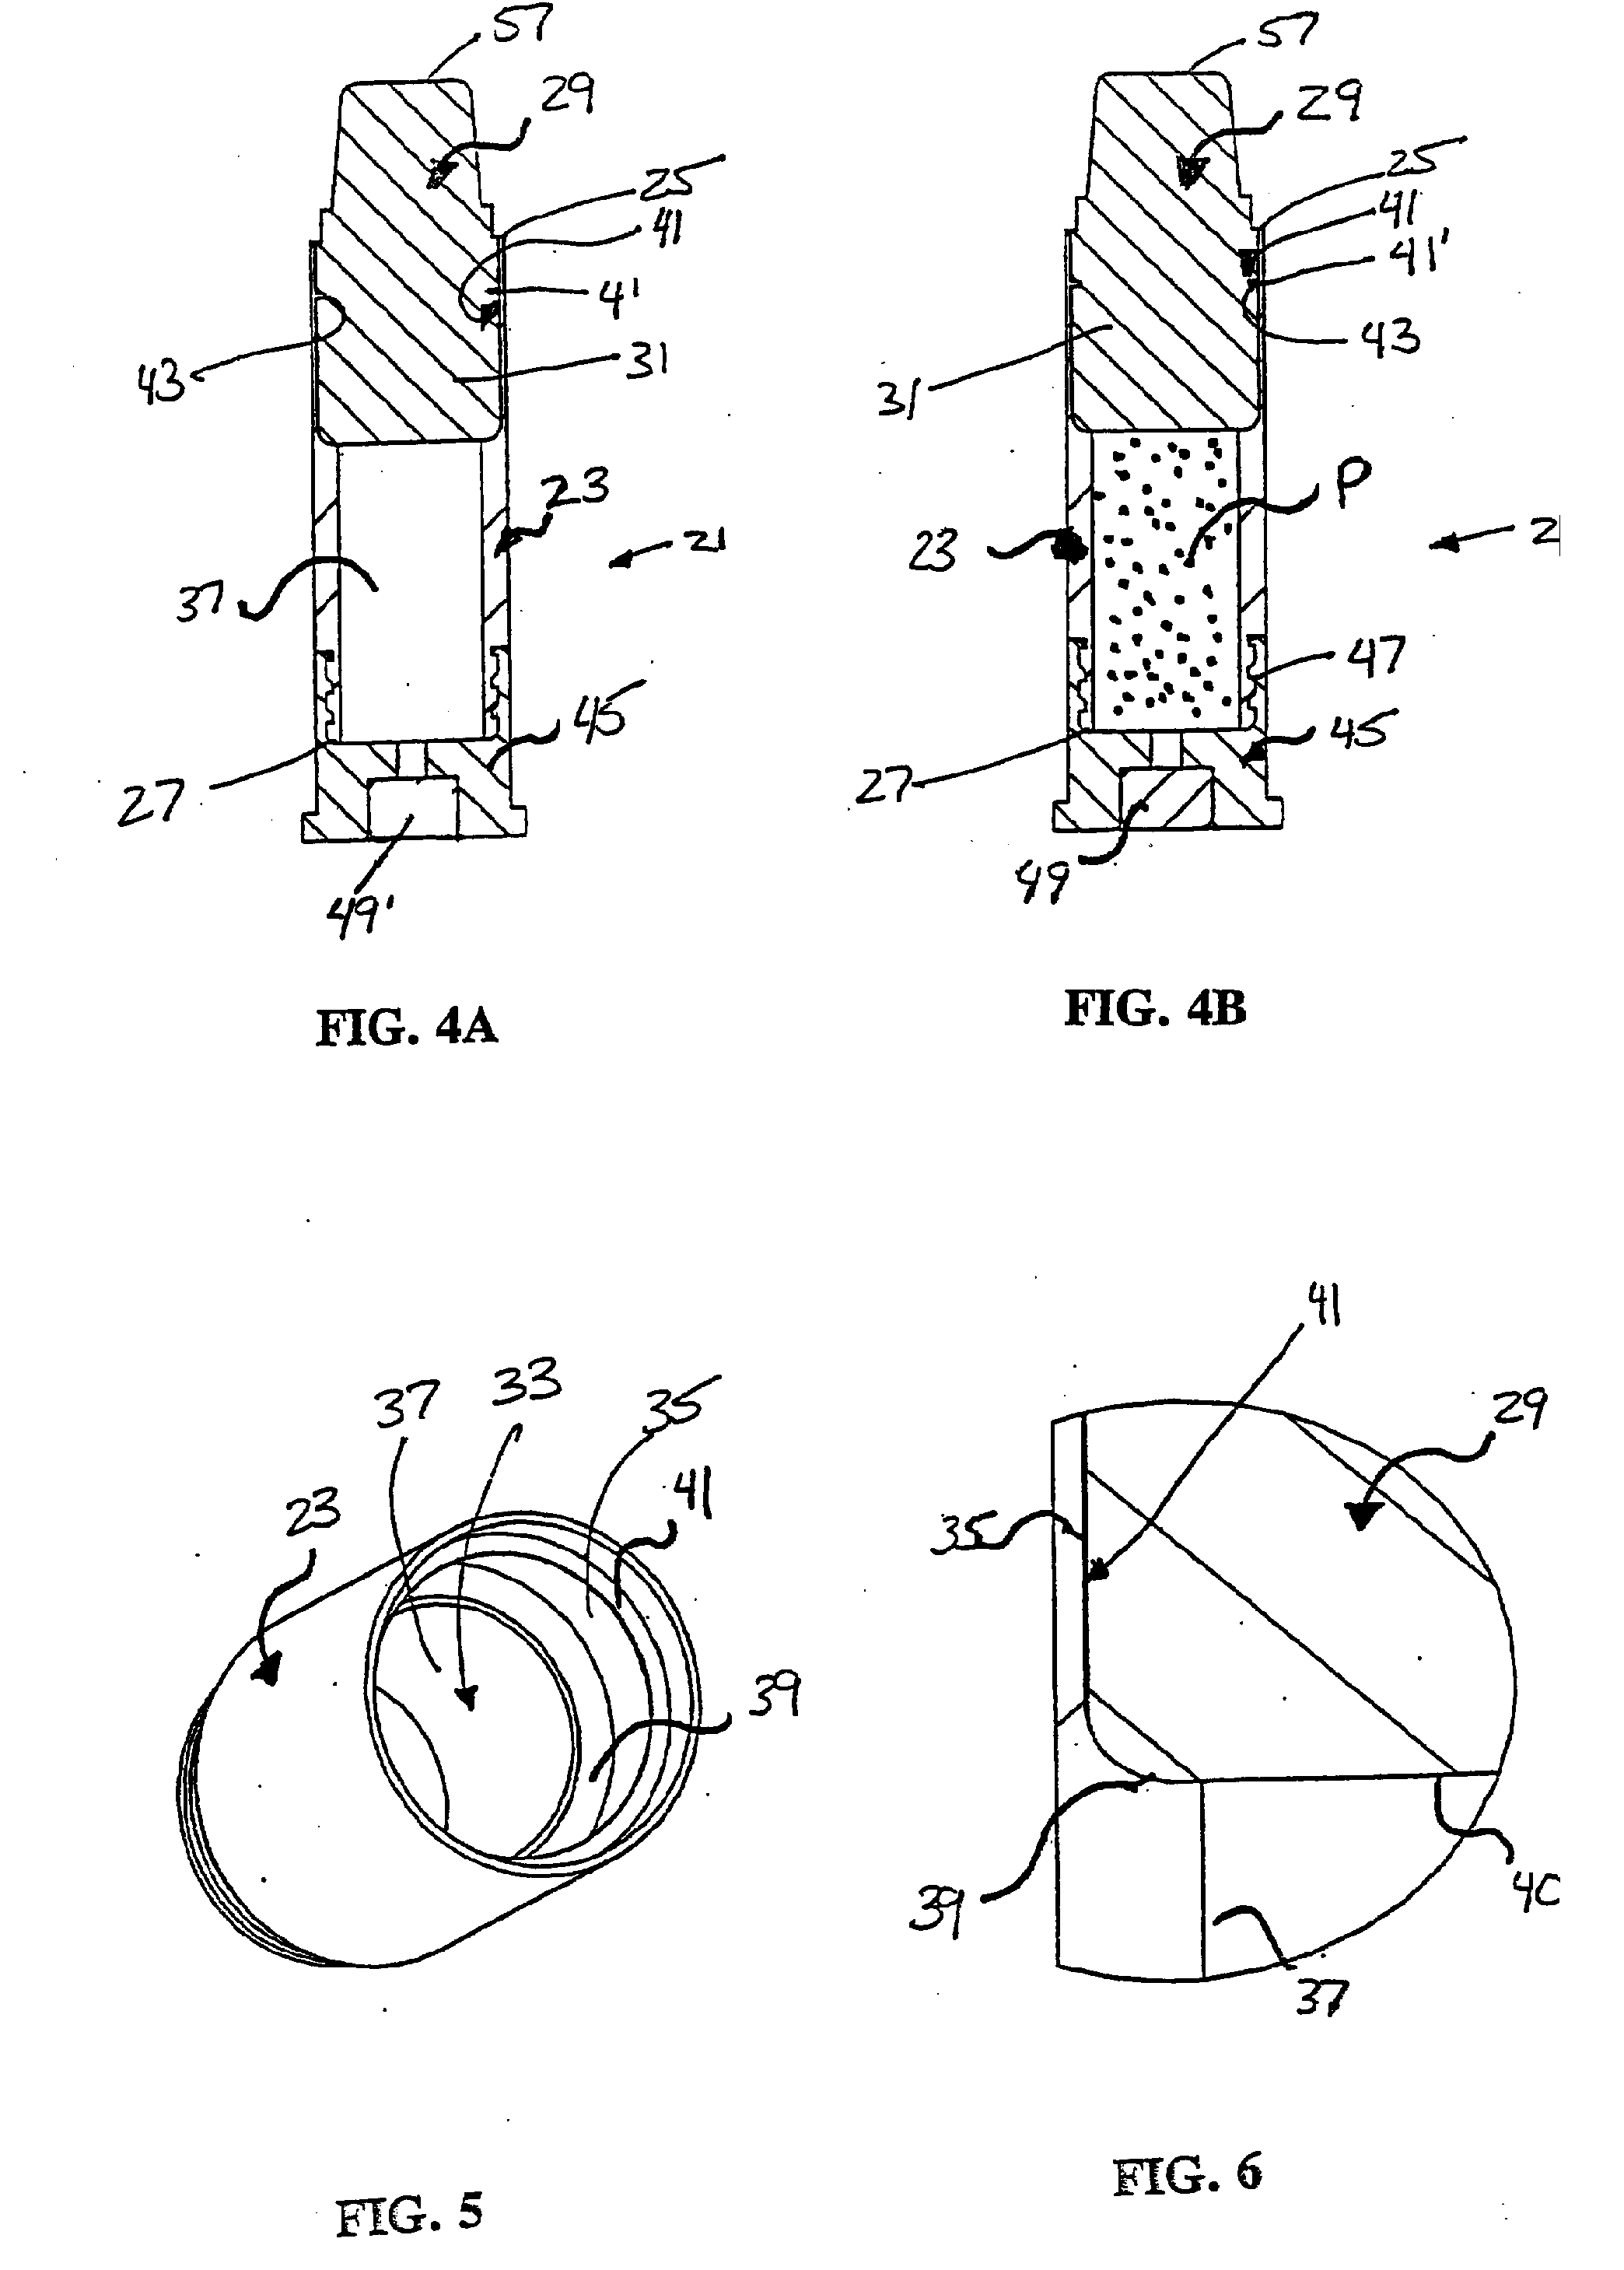 A base for a cartridge casing body for an ammunition article, a cartridge casing body and an ammunition article having such base, wherein the base is made from plastic, ceramic, or a composite material